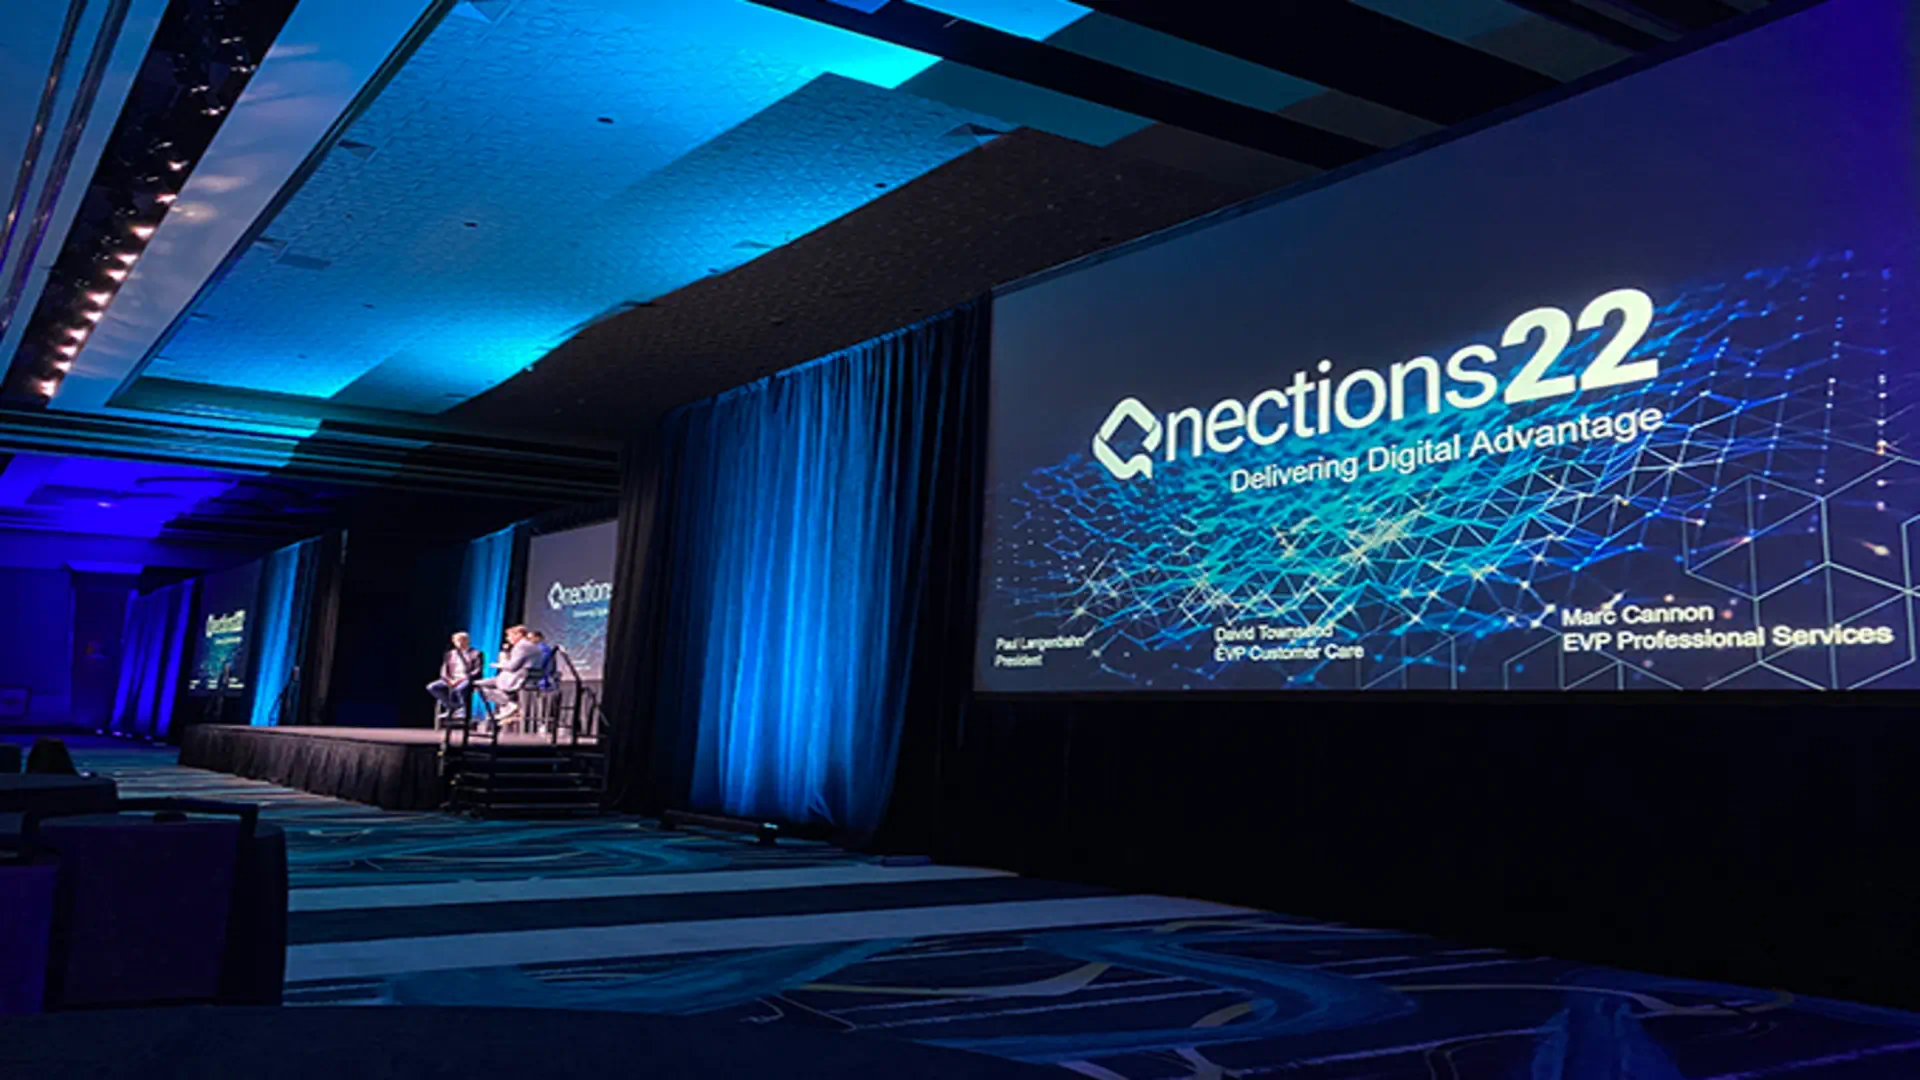 About Quorum - What To Expect At Qnections 22